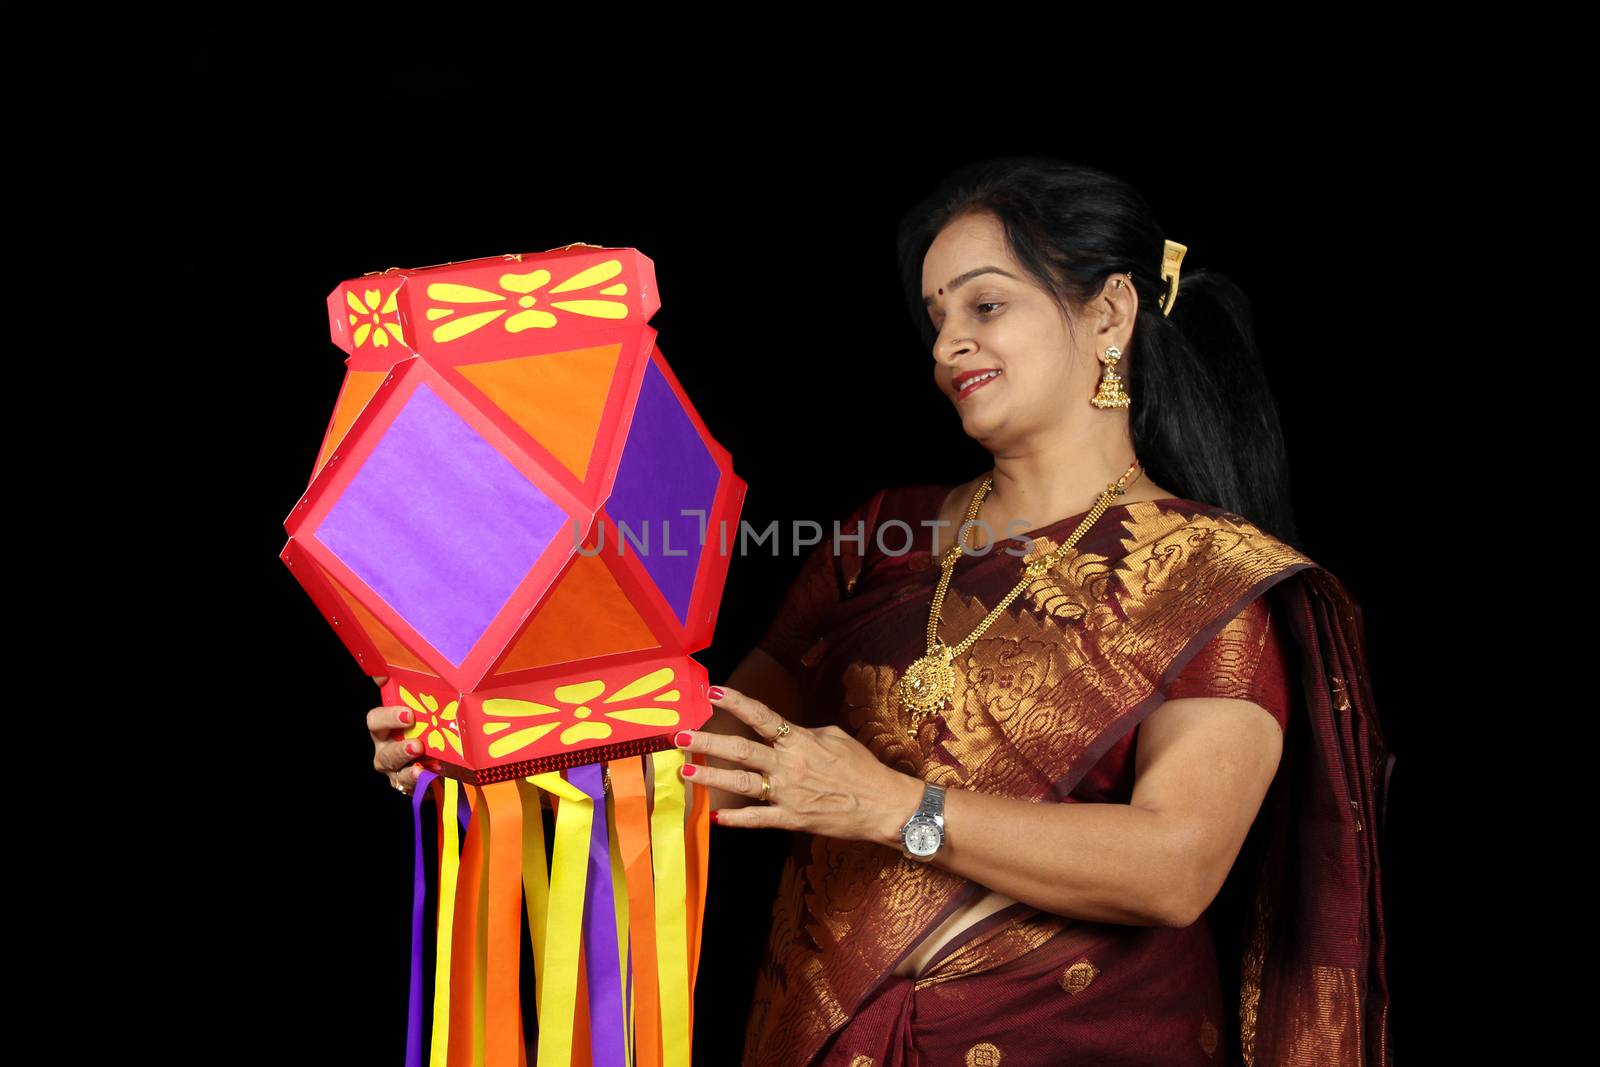 An Indian woman happy with her colorful traditional lantern during Diwali festival in India.